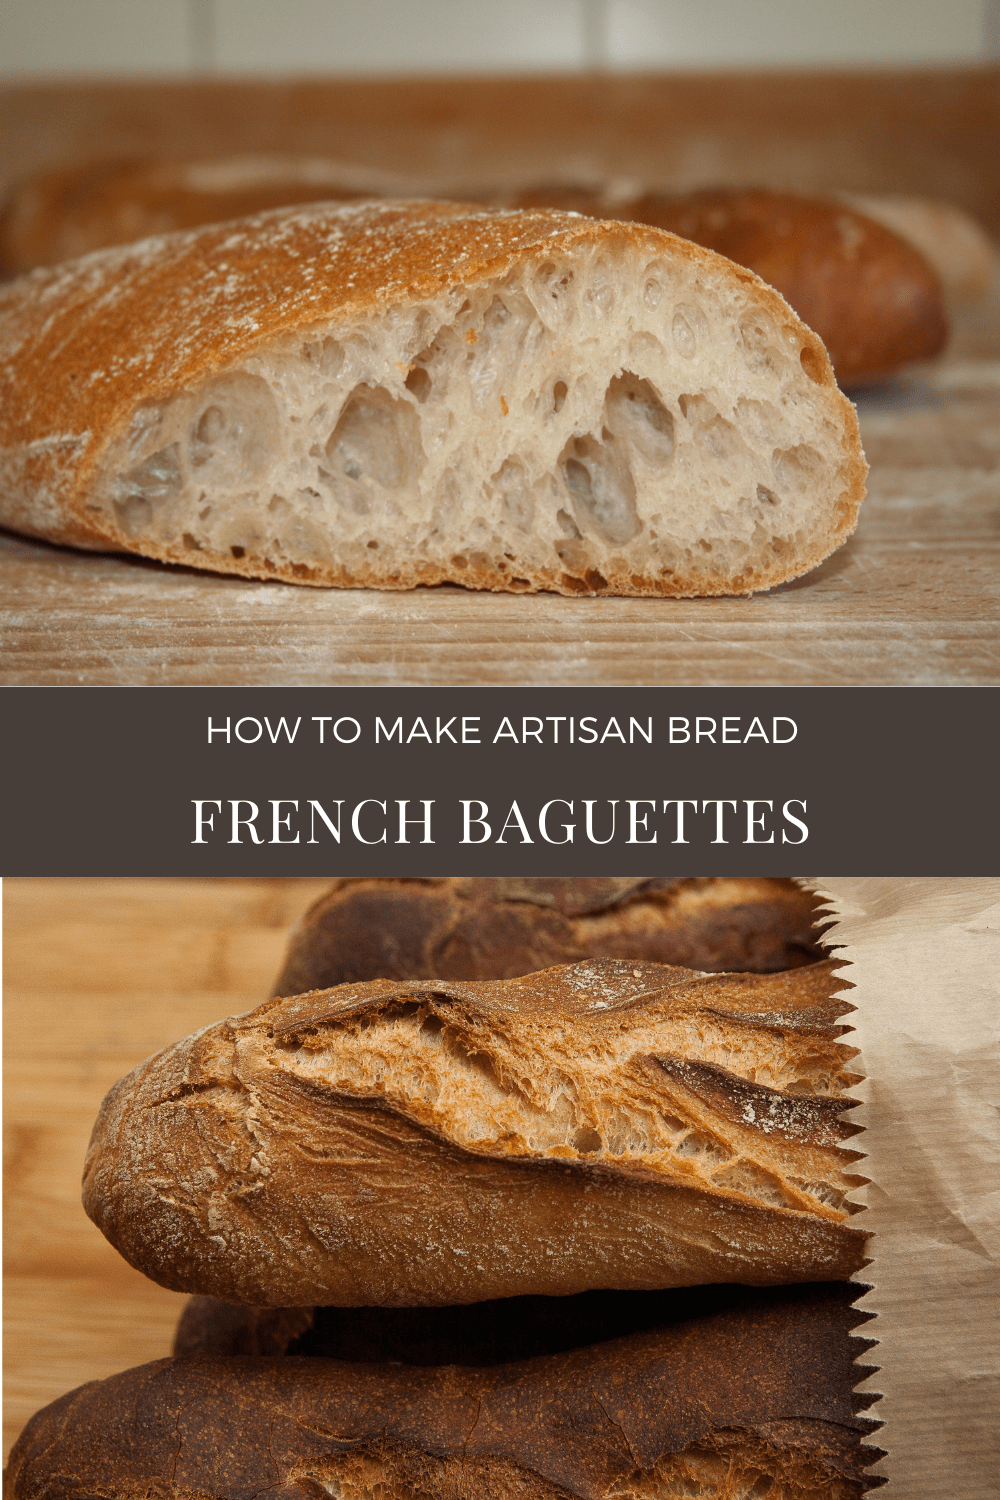 French Baguettes - How to Make Artisan Bread